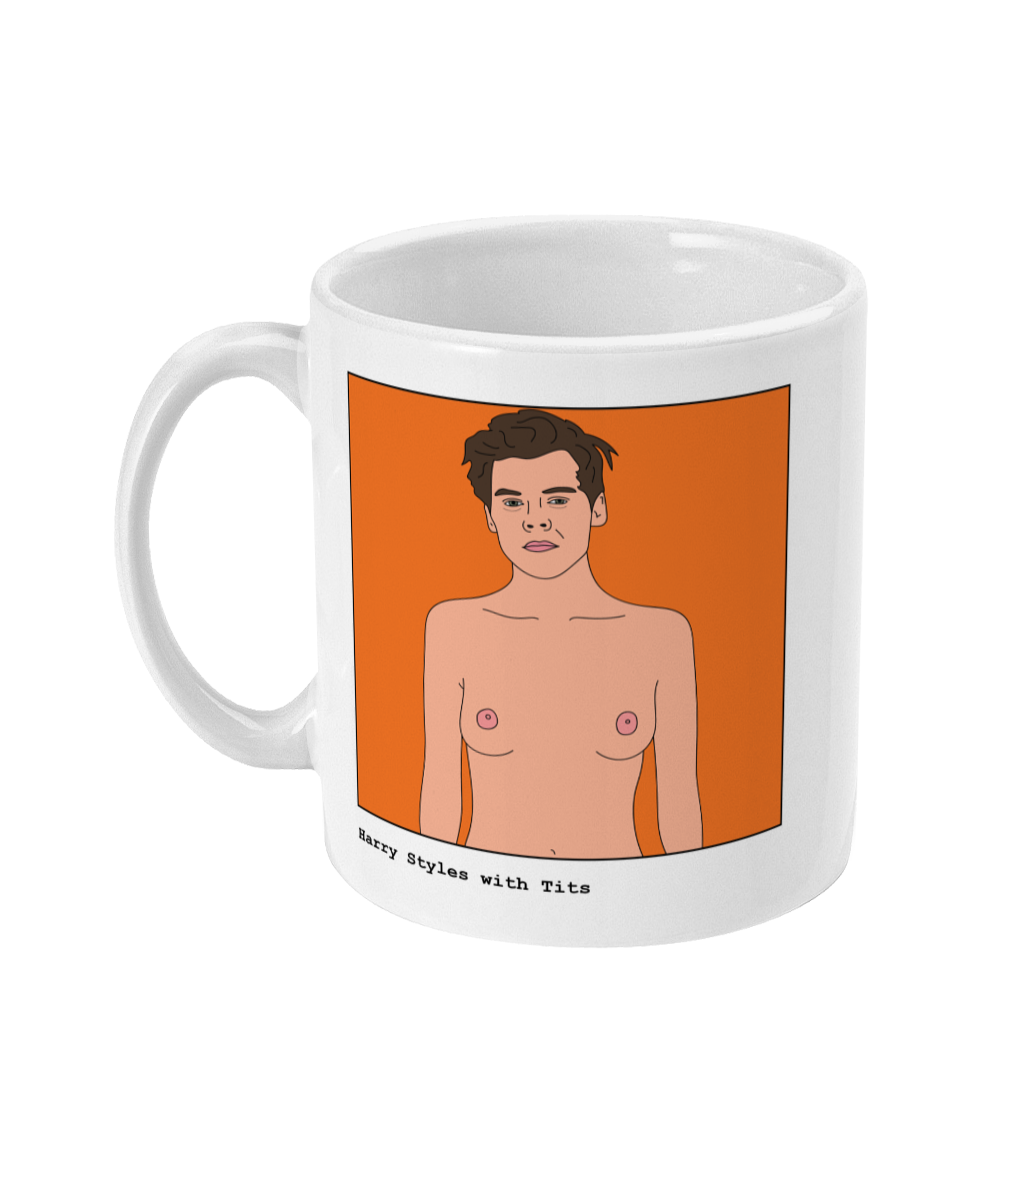 Harry Styles with Tits